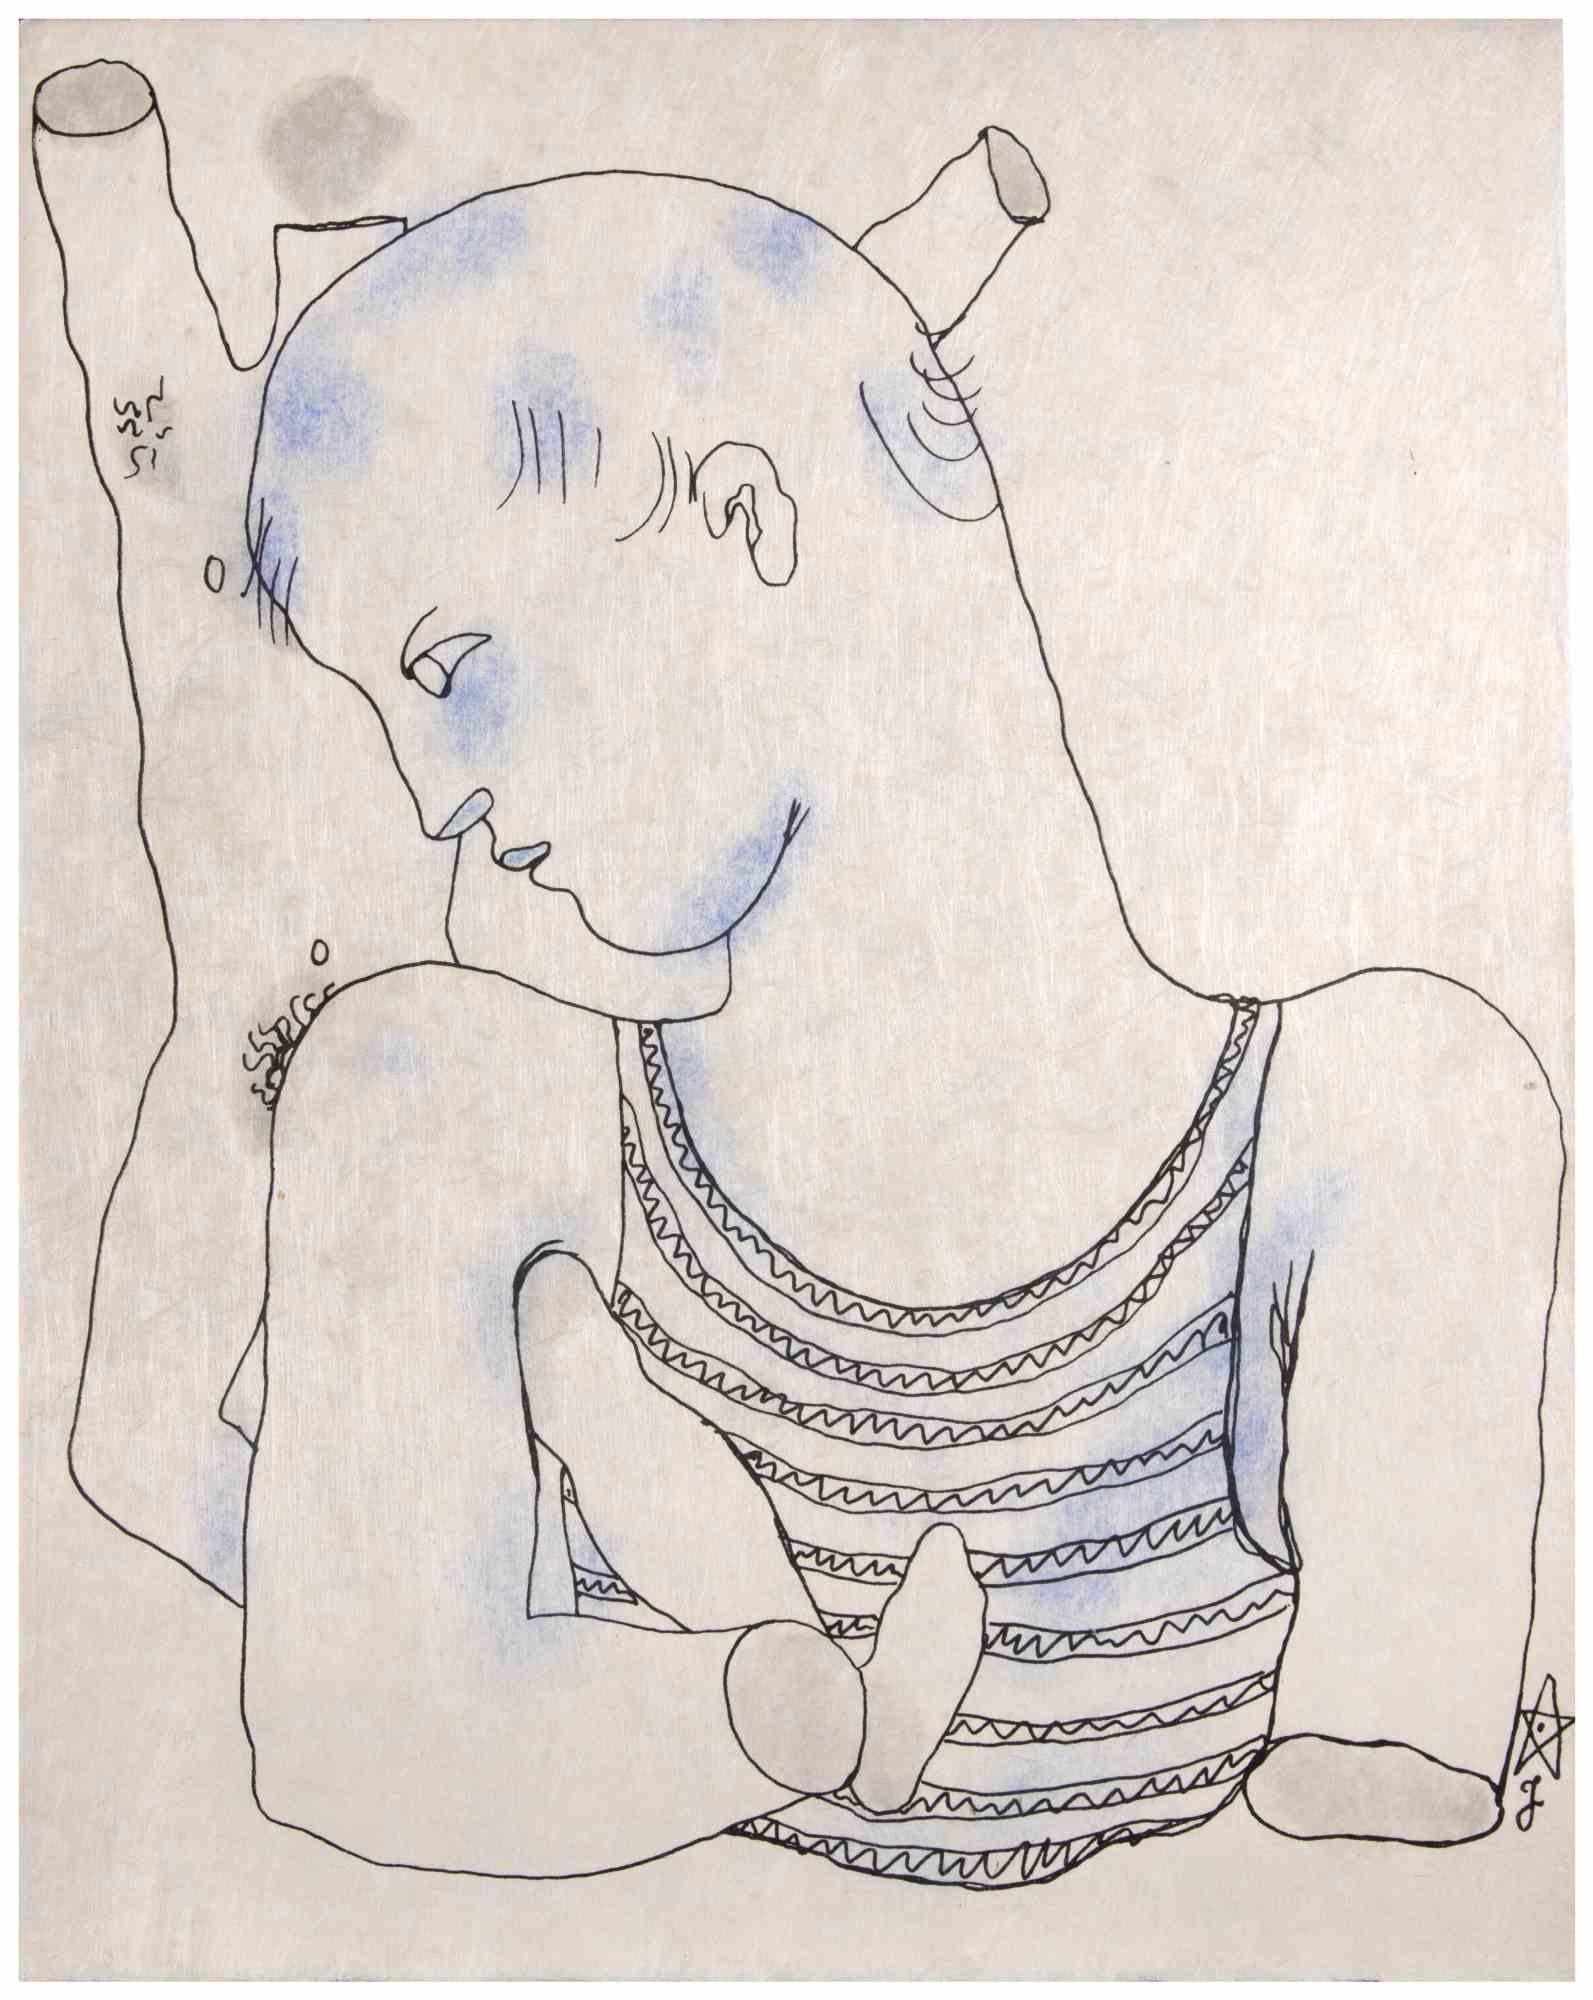 Boy is a Colored lithograph realized by Jean Cocteau (1889 -1963) in 1930 ca. 

French draftsman, poet, essayist, playwright, librettist, film director.

Good conditions.

Jean Cocteau , influential french artist and writer, is a major figure of